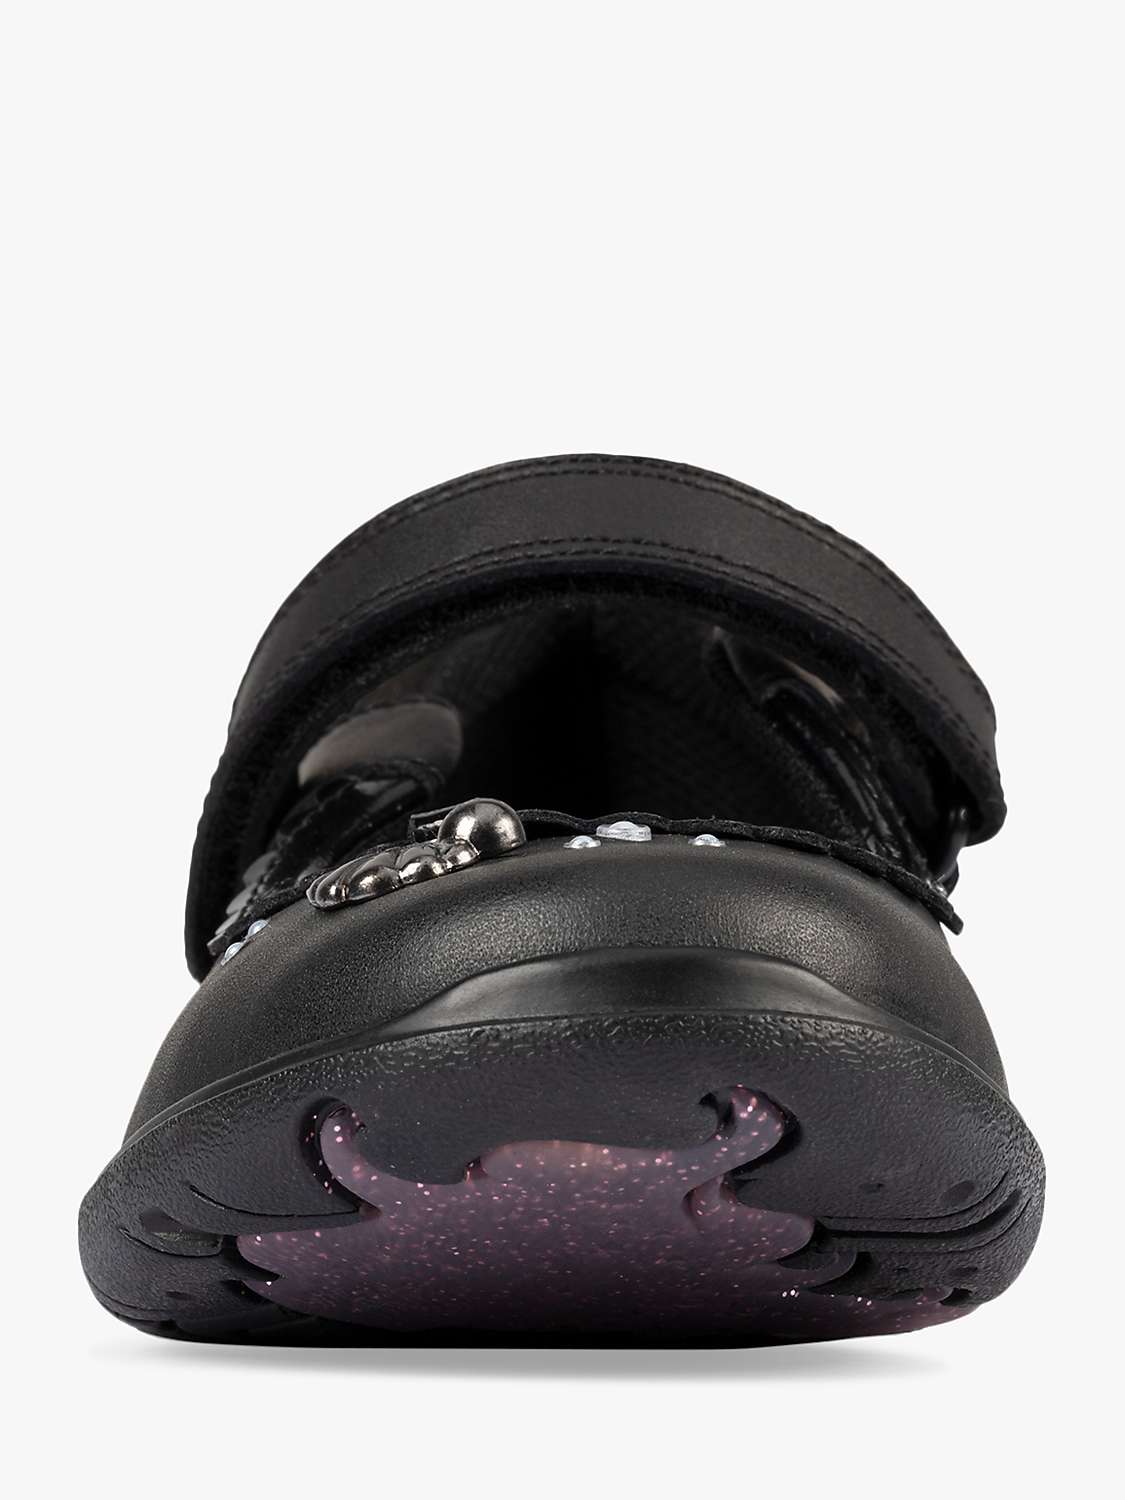 Buy Clarks Children's Sea Simmer Mary Jane School Shoes Online at johnlewis.com